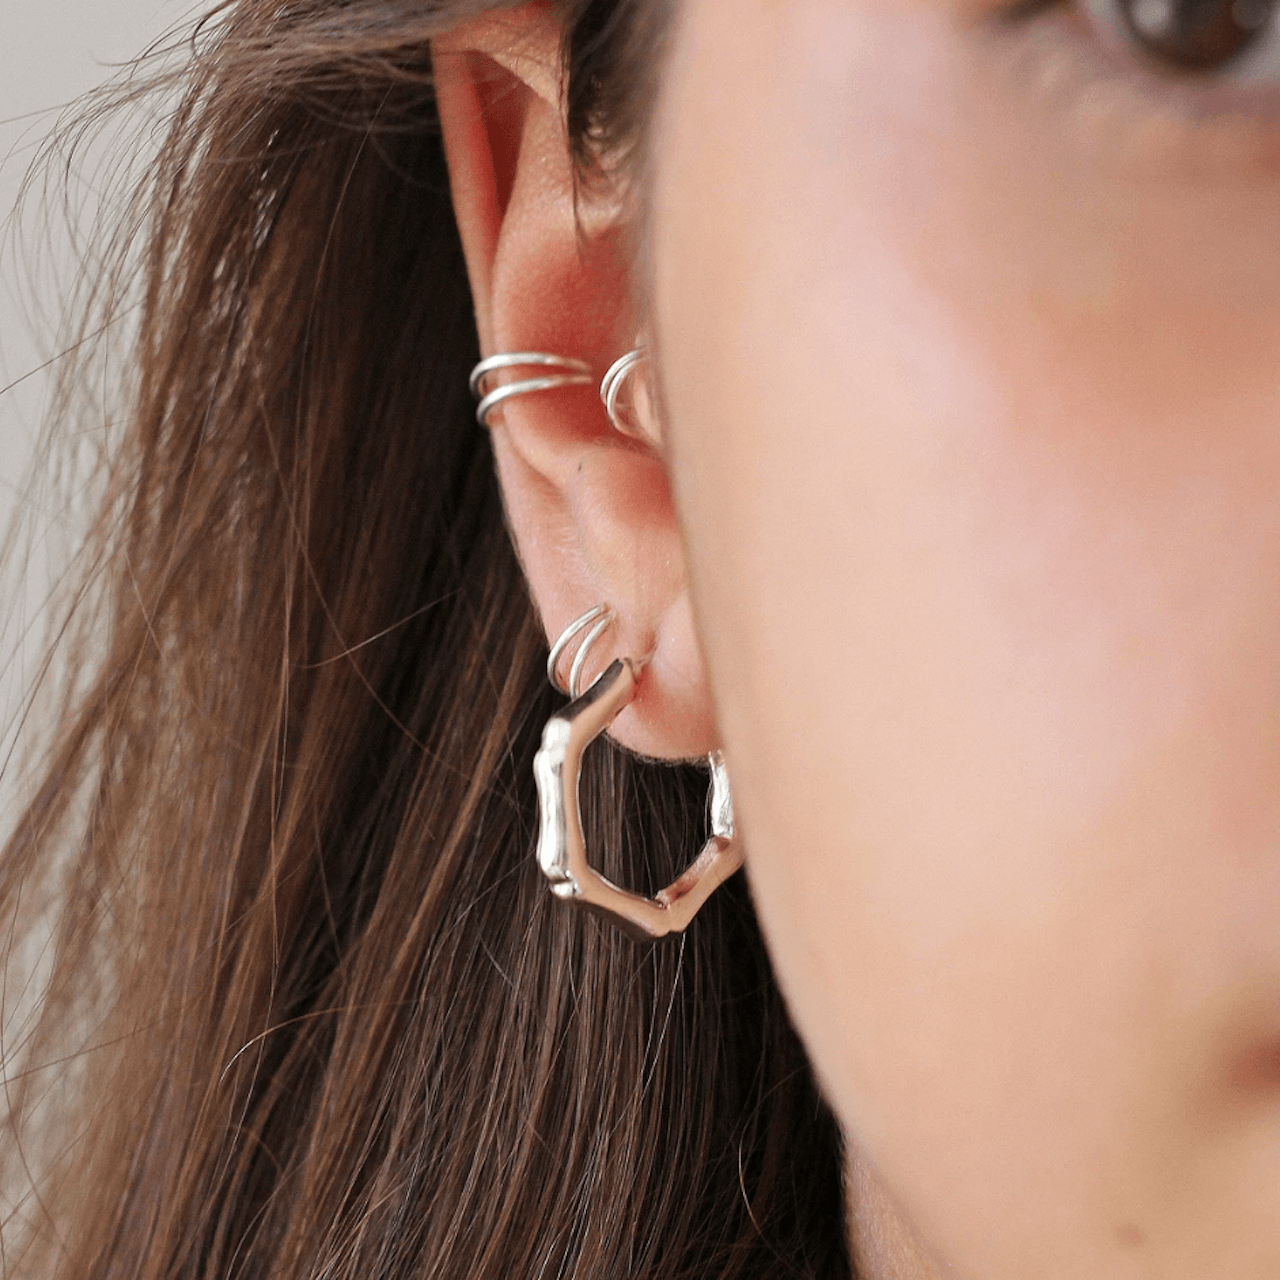 DOUBLE CLICKER EARRING FOR CONCH PIERCING